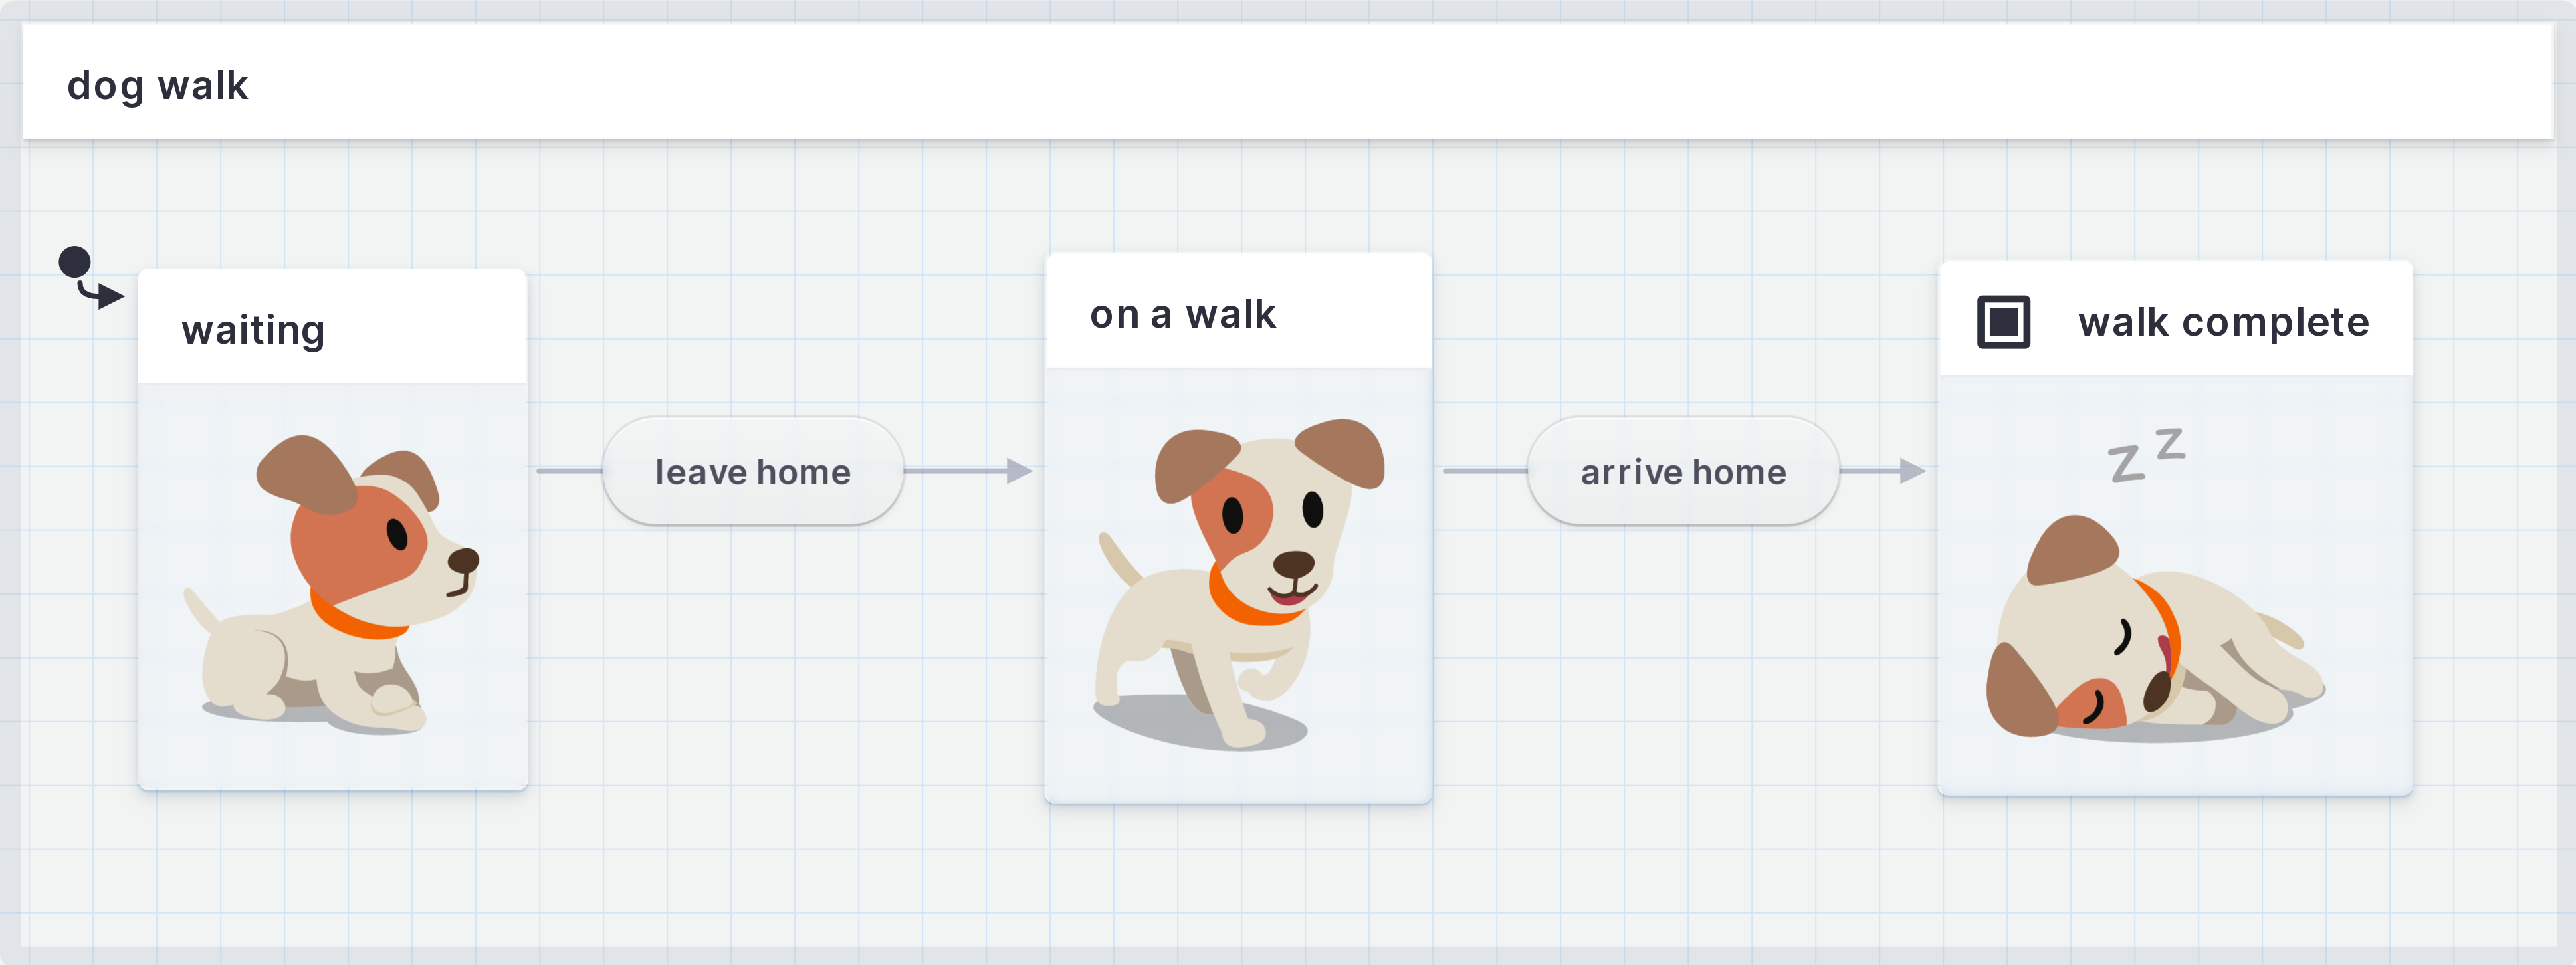 Dog walking statechart showing waiting state transitioning through the leave home event to the on a walk state, then transitioning through the arrive home event to the final state of walk complete.